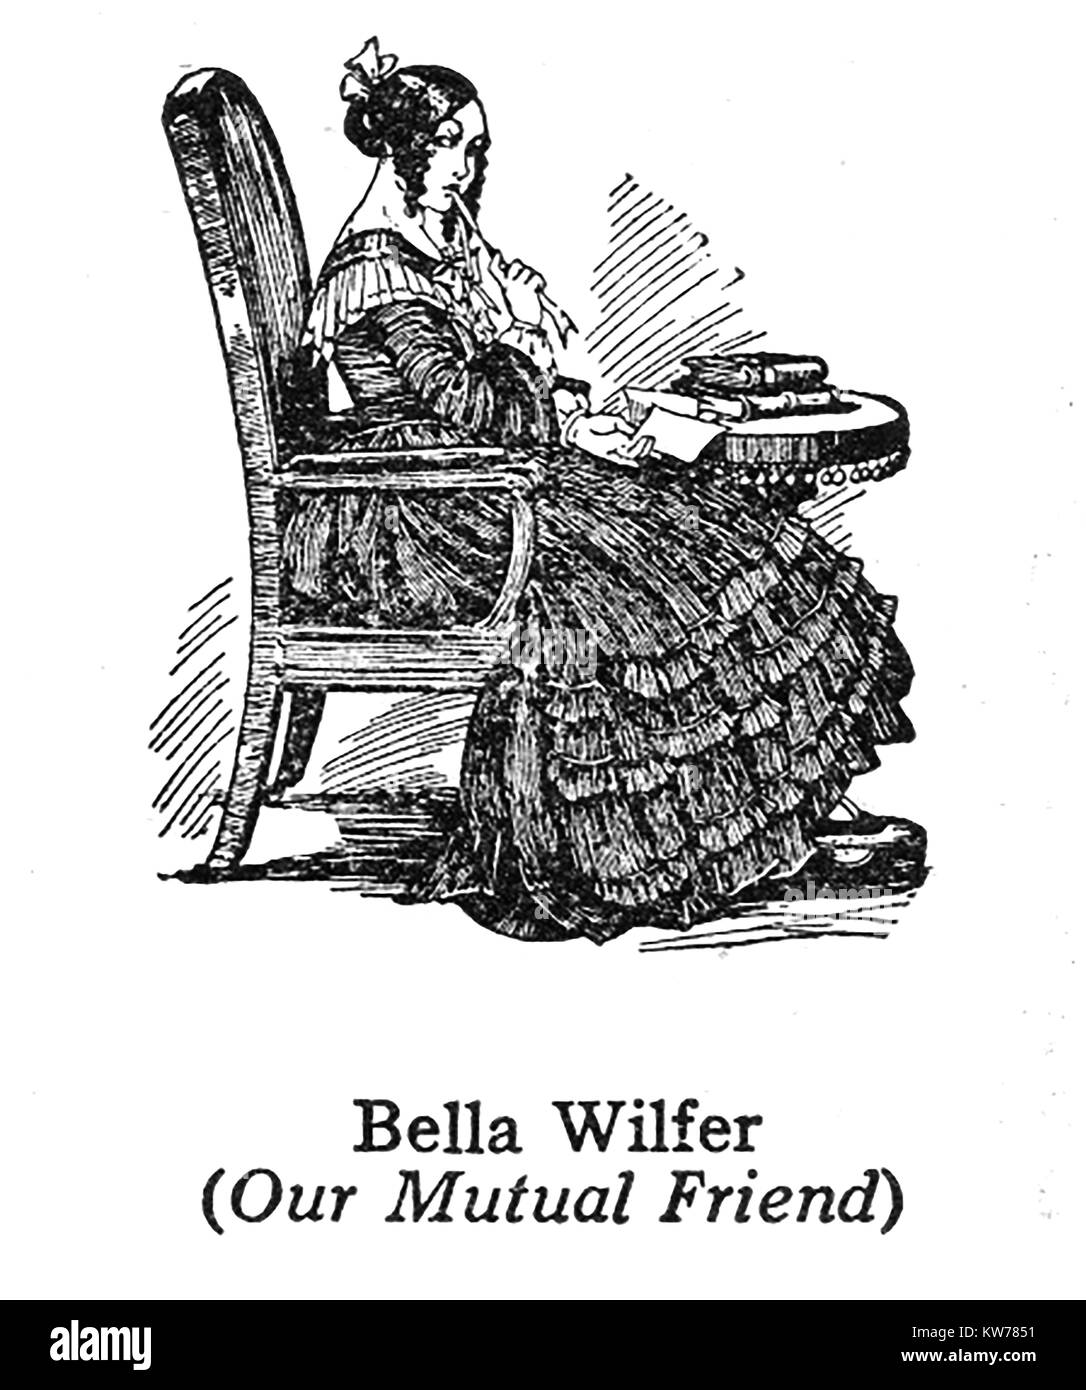 Charles Dickens 1812 to 1870 -Dickens characters -1930's illustration - Bella Wilfer from 'Our Mutual Friend' Stock Photo